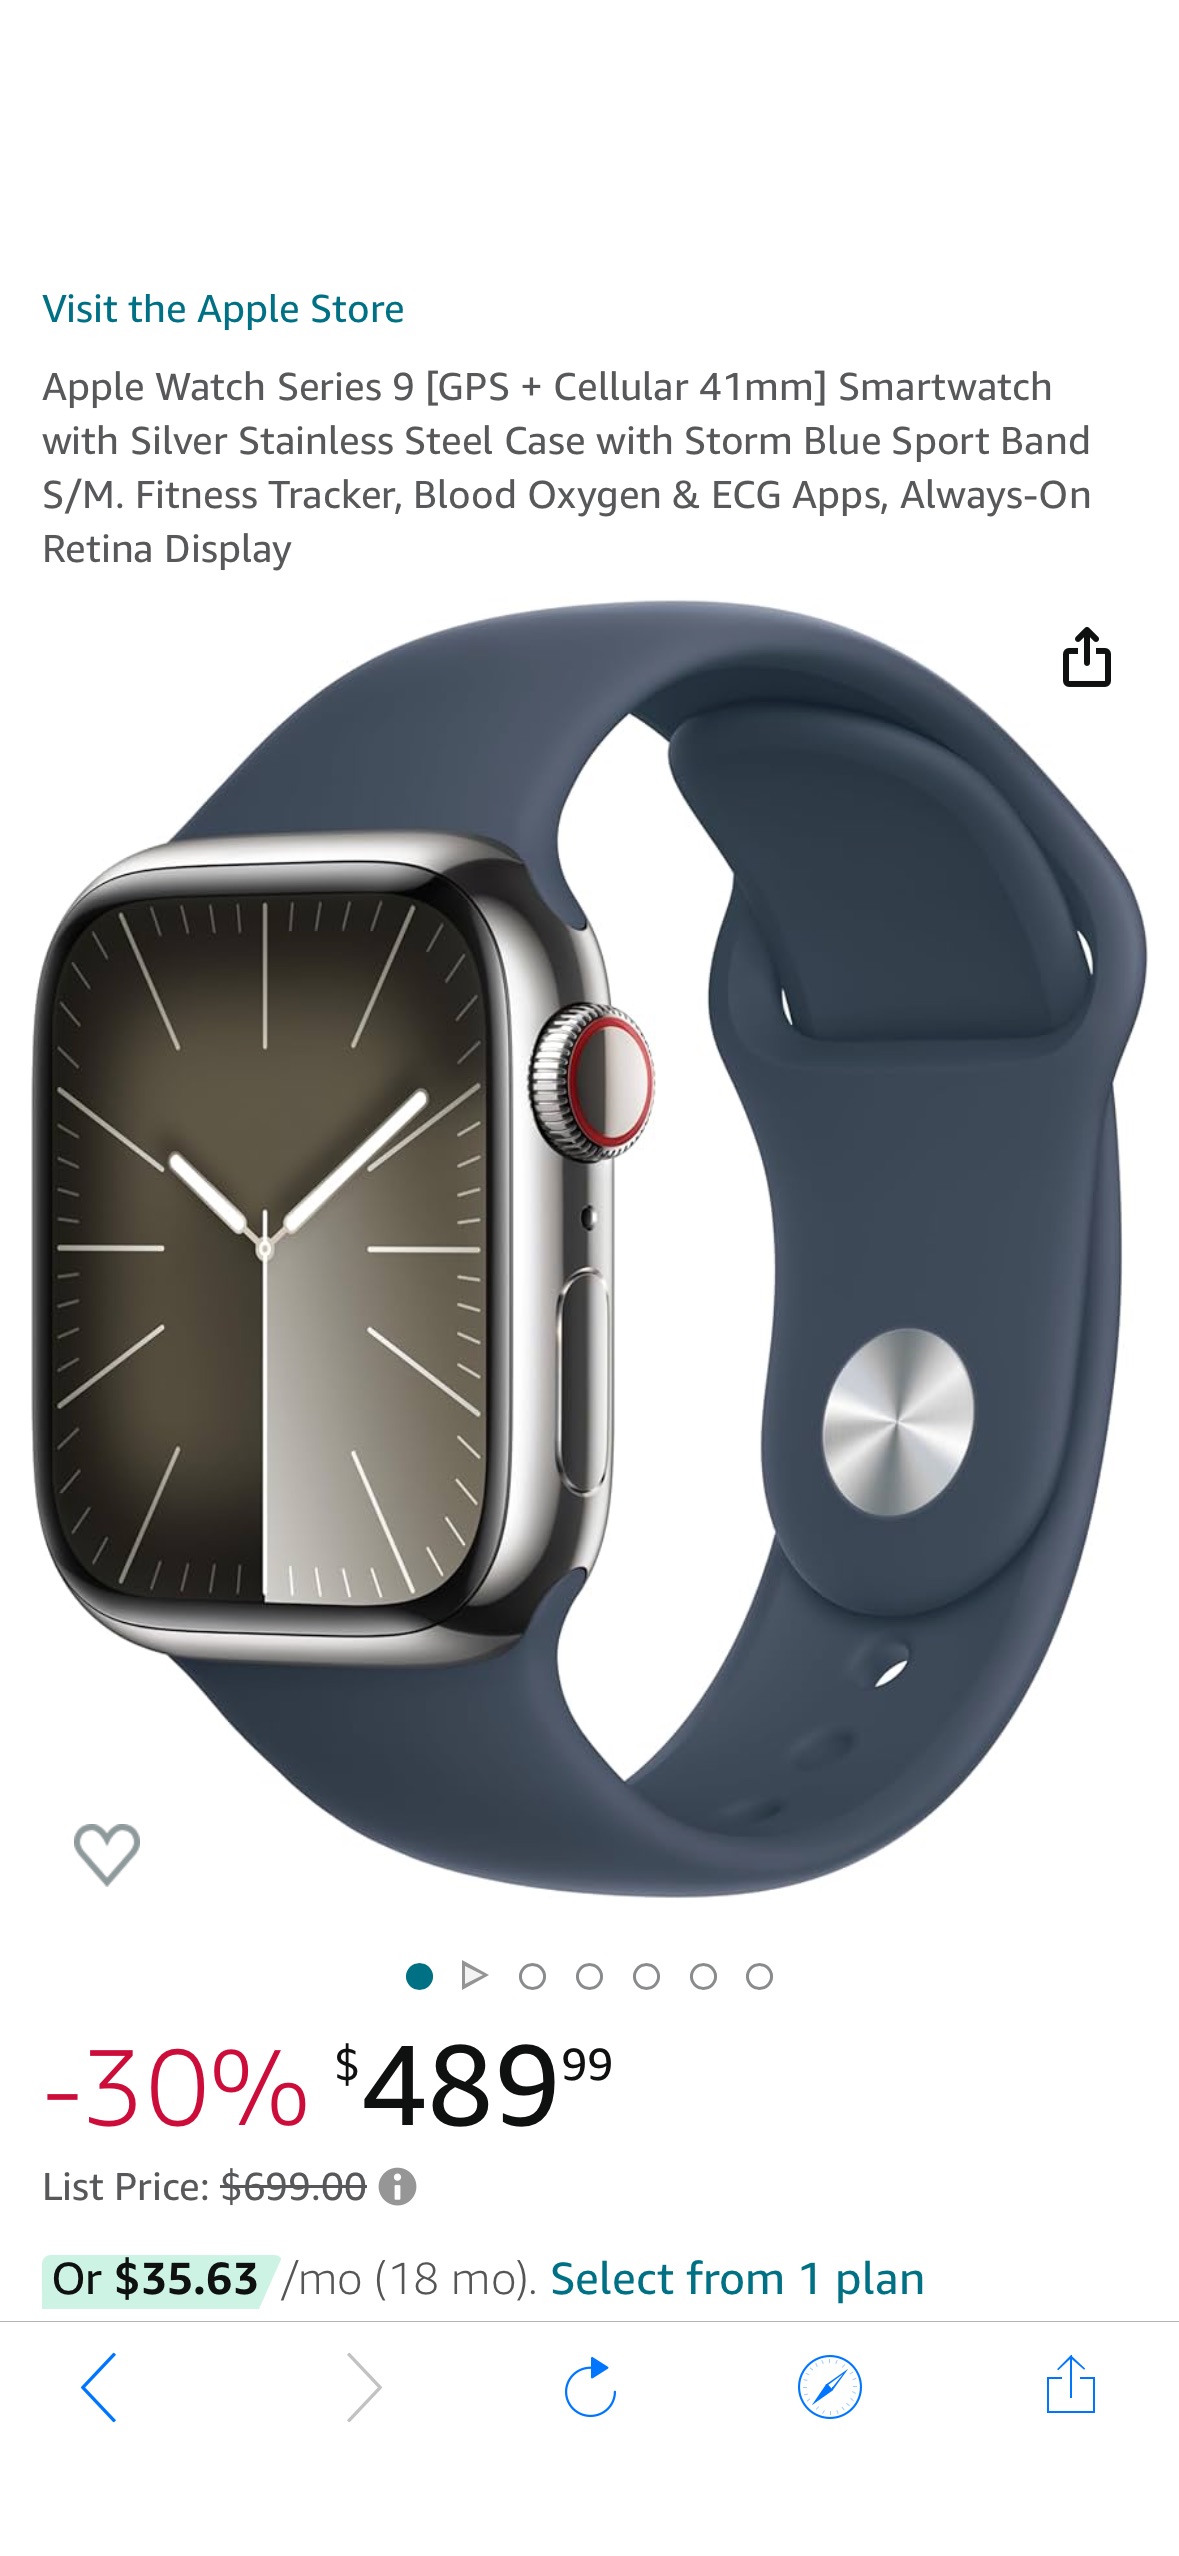 Amazon.com: Apple Watch Series 9 [GPS + Cellular 41mm] Smartwatch with Silver Stainless Steel 缺货仍可下单